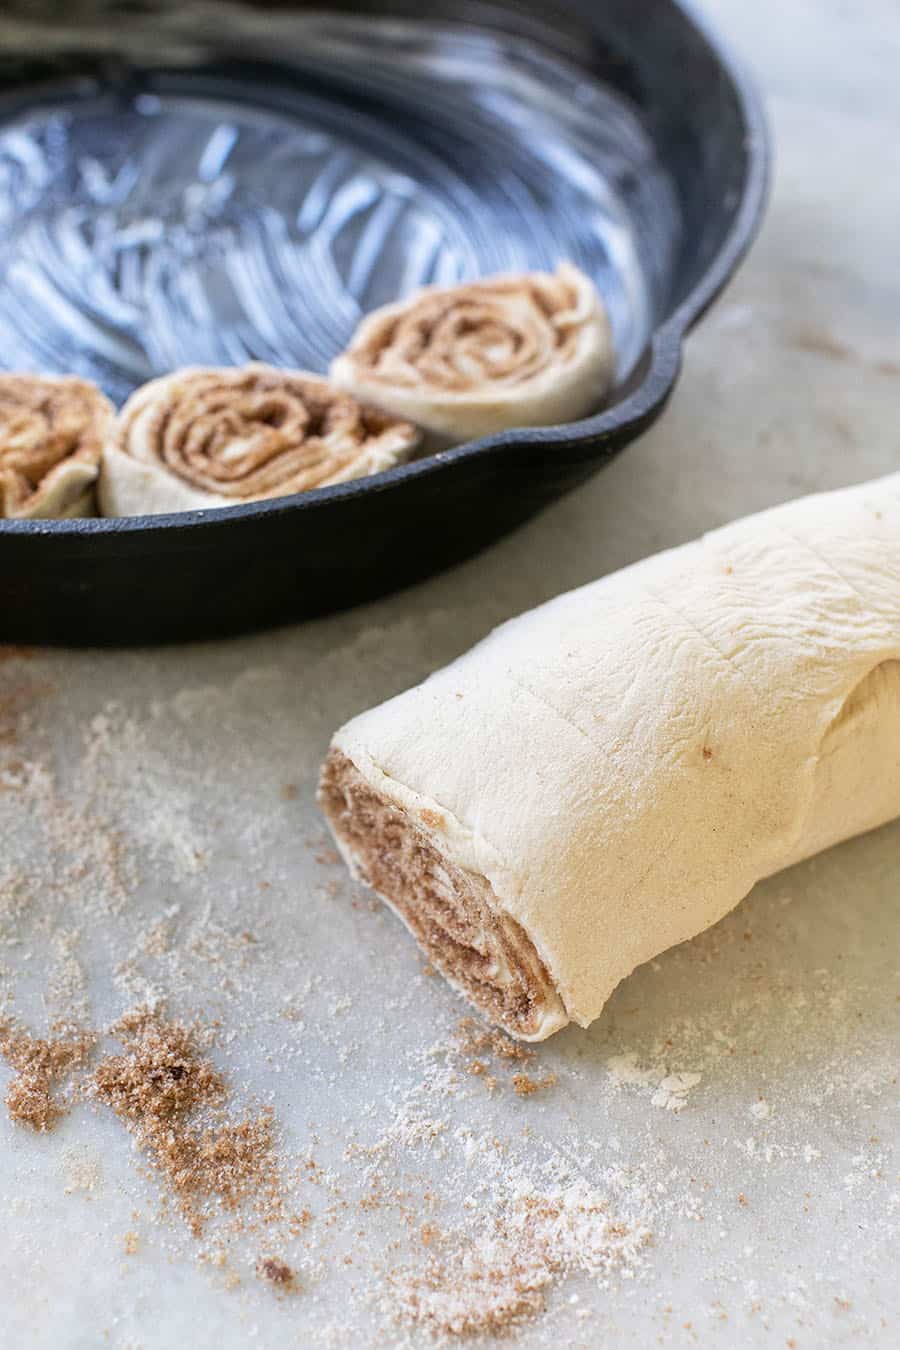 Rolling up a cinnamon roll to put into a pan to bake.